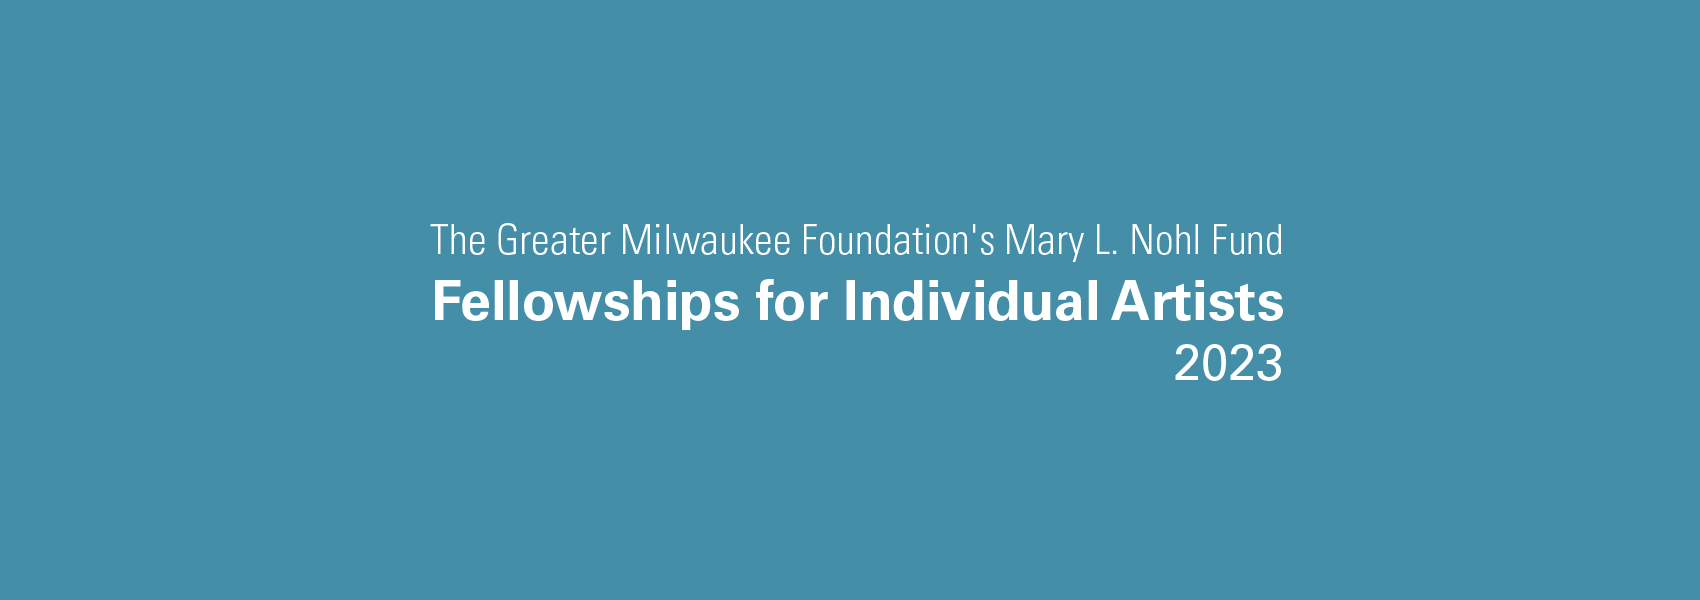 THE GREATER MILWAUKEE FOUNDATION’S MARY L. NOHL FUND FELLOWSHIPS FOR INDIVIDUAL ARTISTS 2023